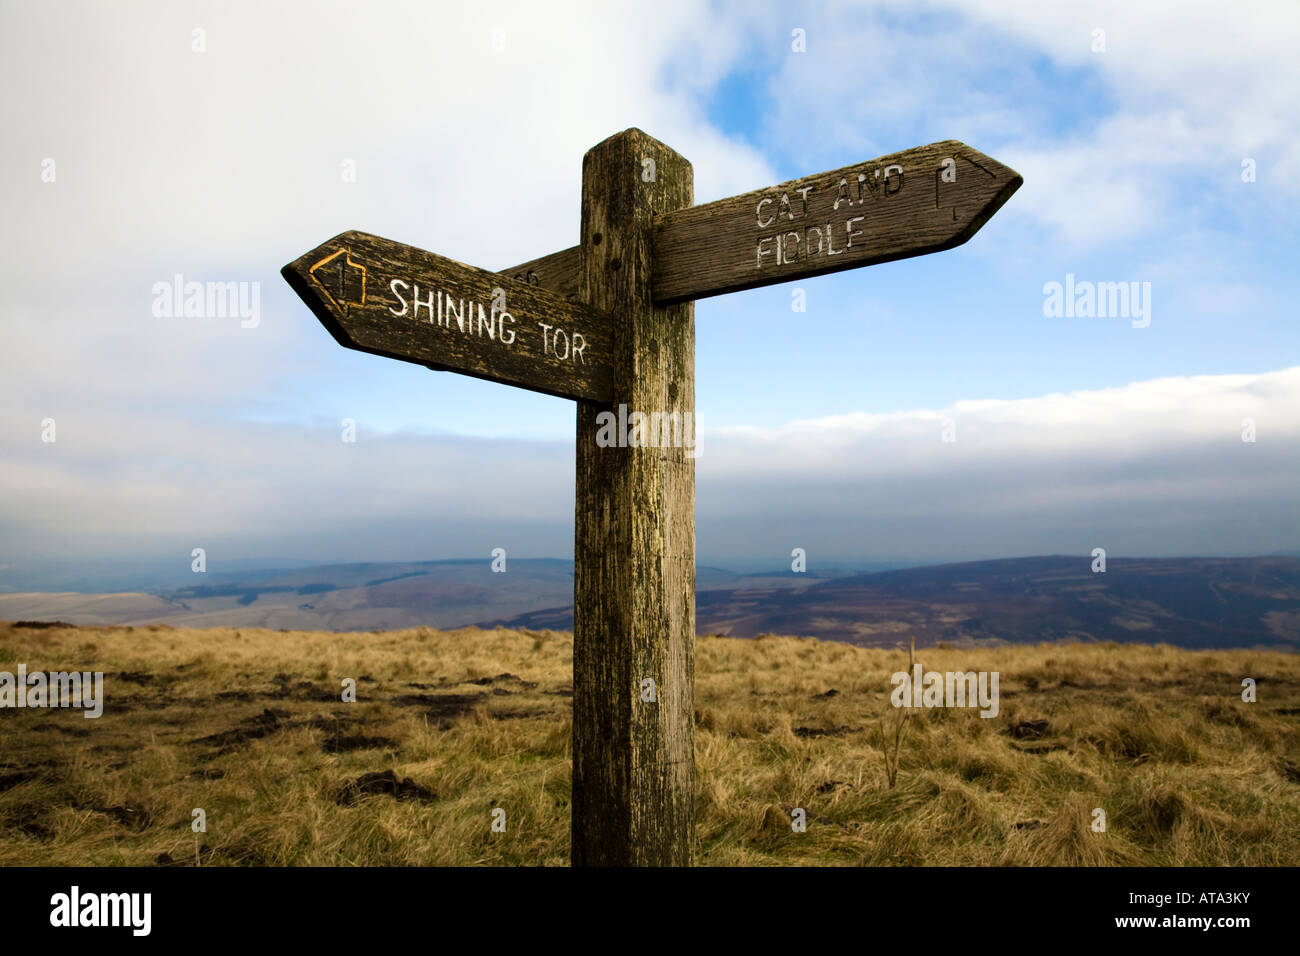 Shining Tor to Cat and Fiddle pub wooden sign in the Peak District Stock Photo